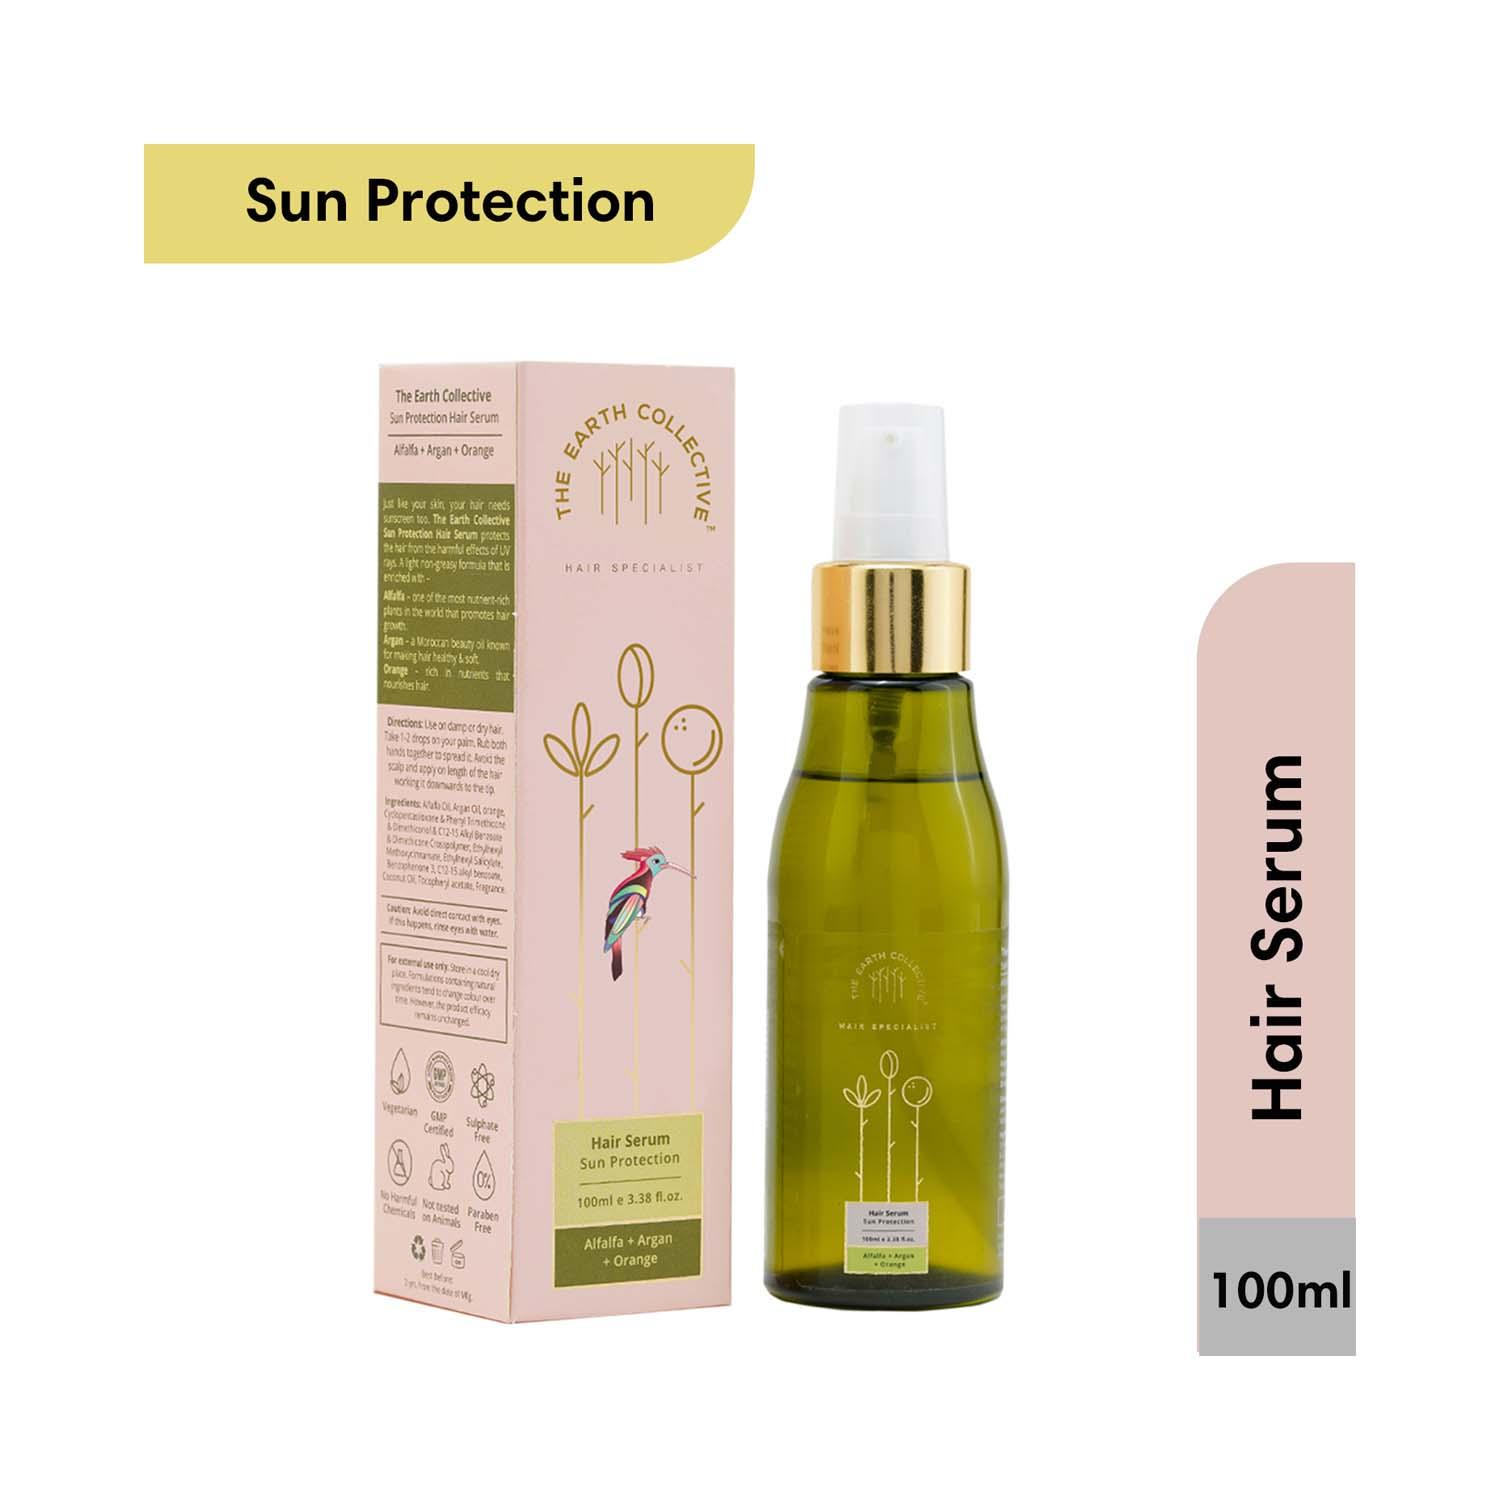  | The Earth Collective Sun Protection Hair Serum With SPF 15 (100 ml)